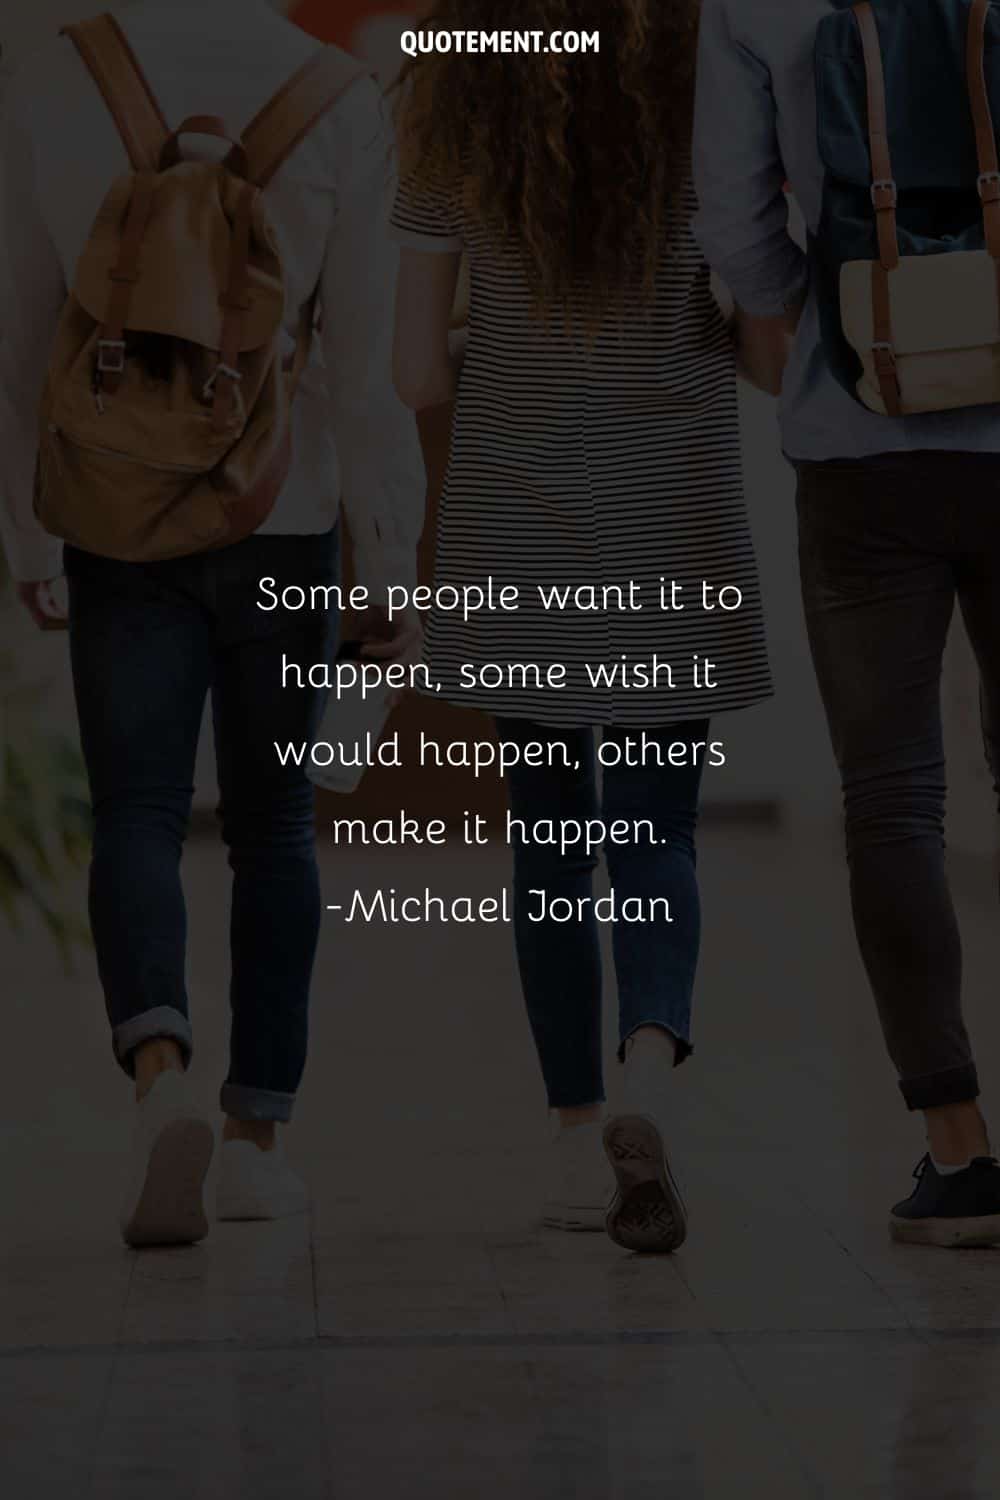 Some people want it to happen, some wish it would happen, others make it happen